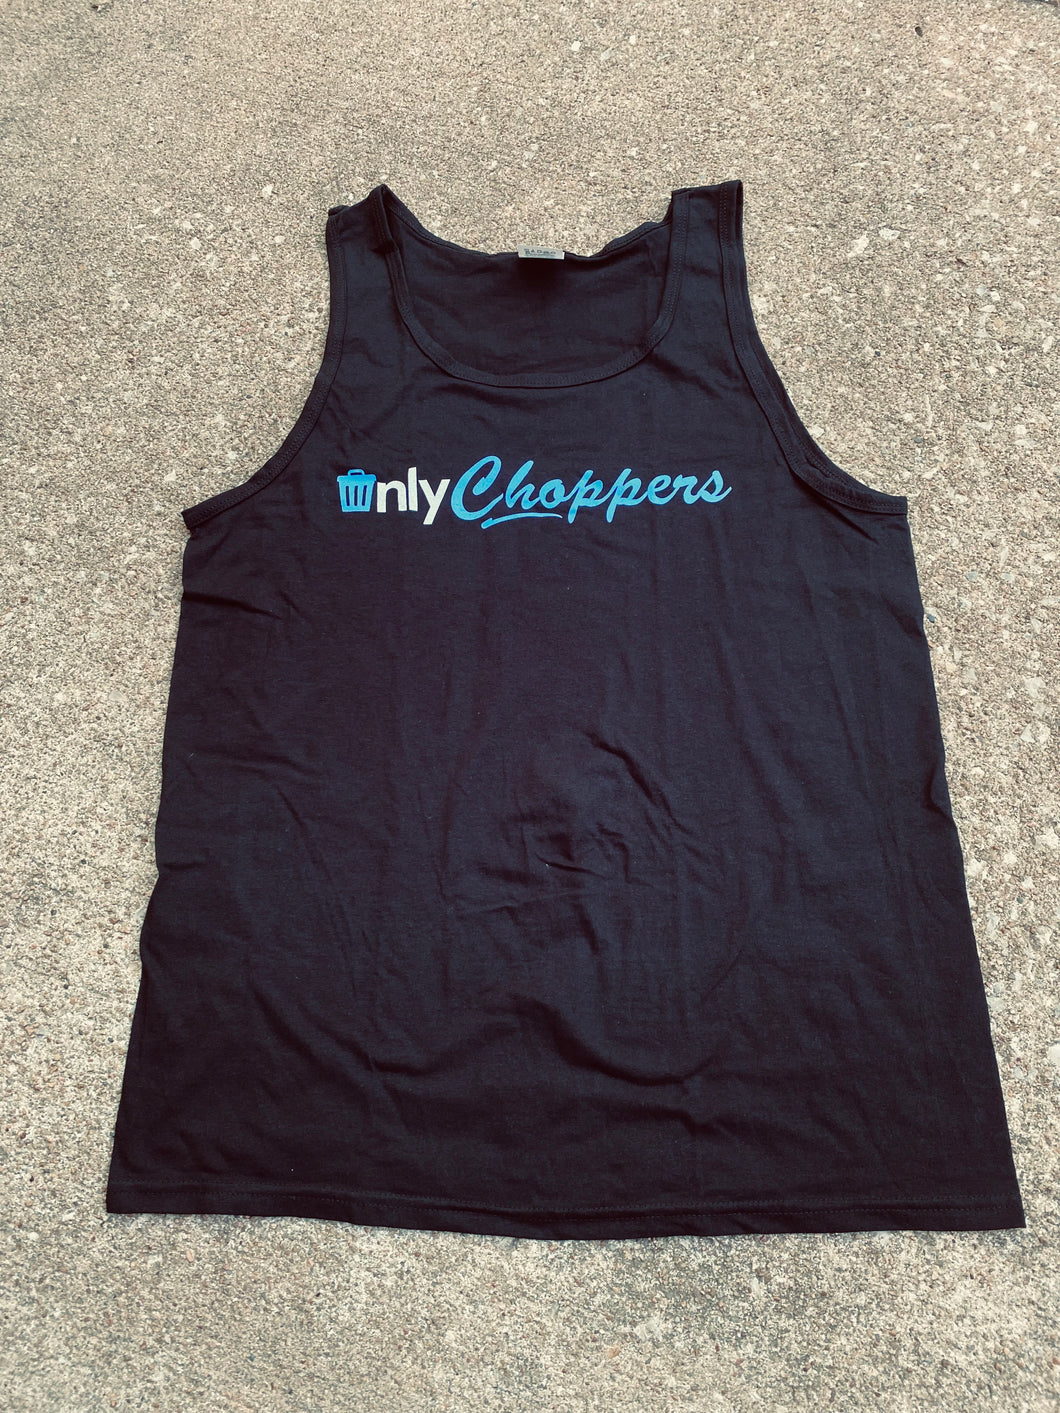 Only Choppers Tank Top